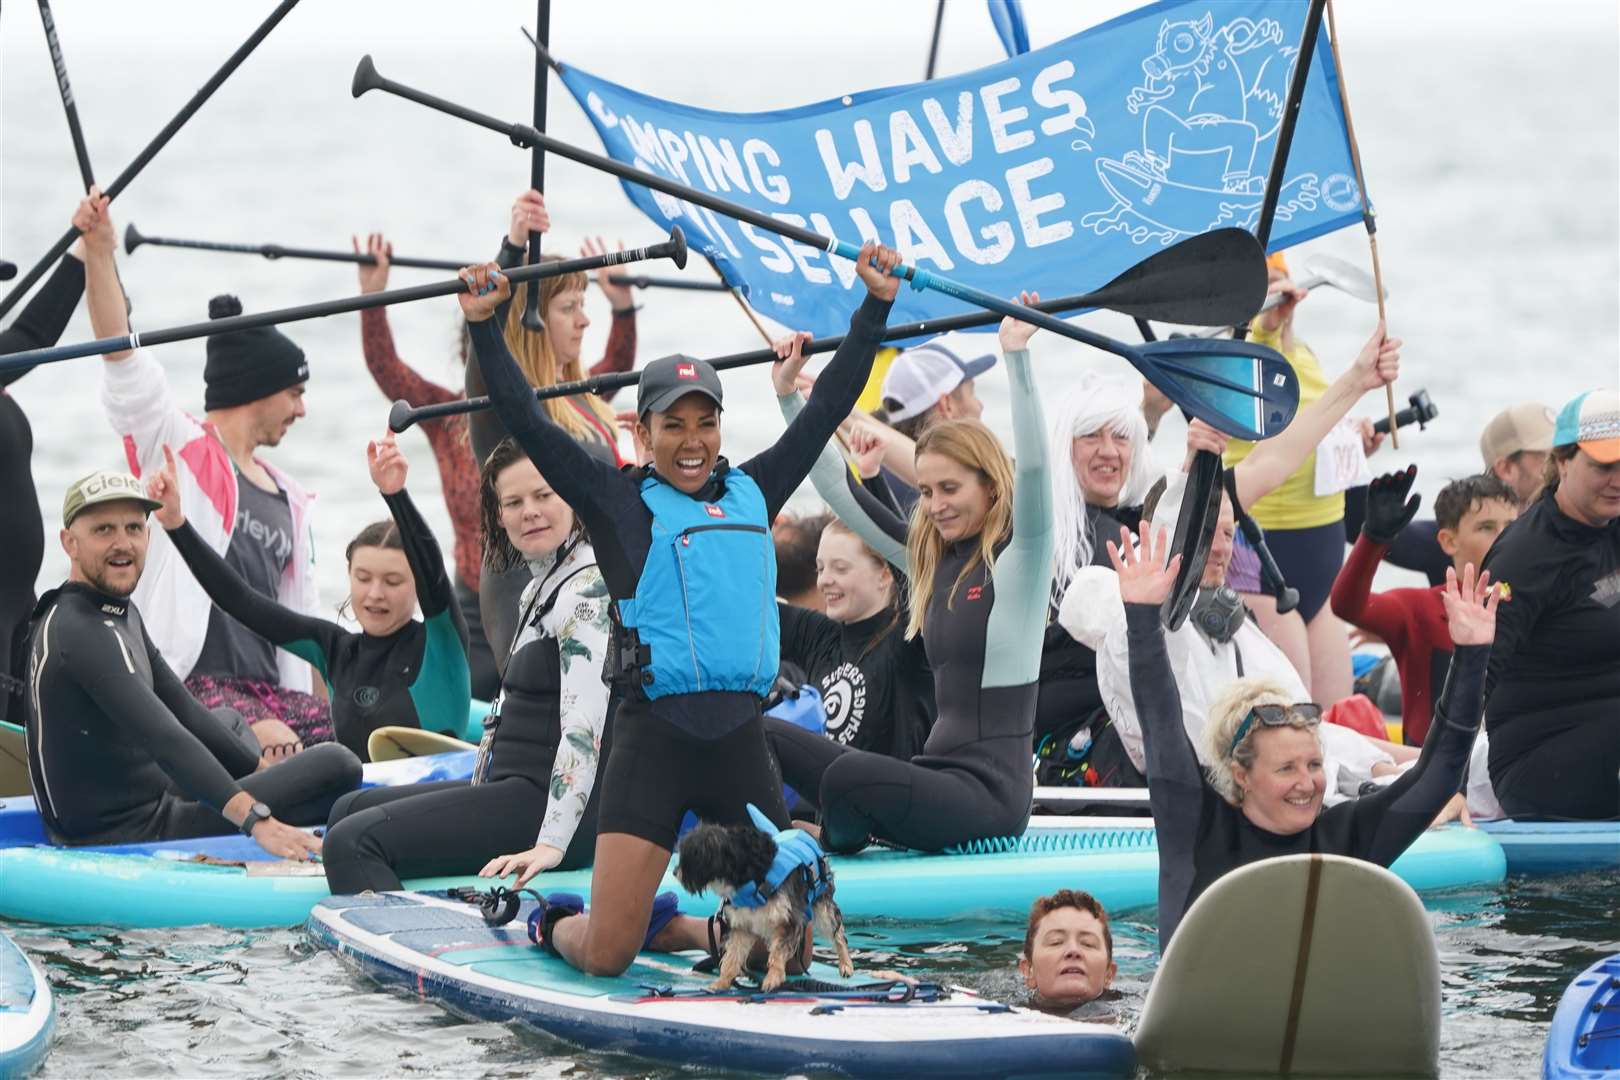 Olympian and keen paddle-boarder Dame Kelly Holmes during a Surfers Against Sewage paddle-out protest in Brighton (Gareth Fuller/PA)